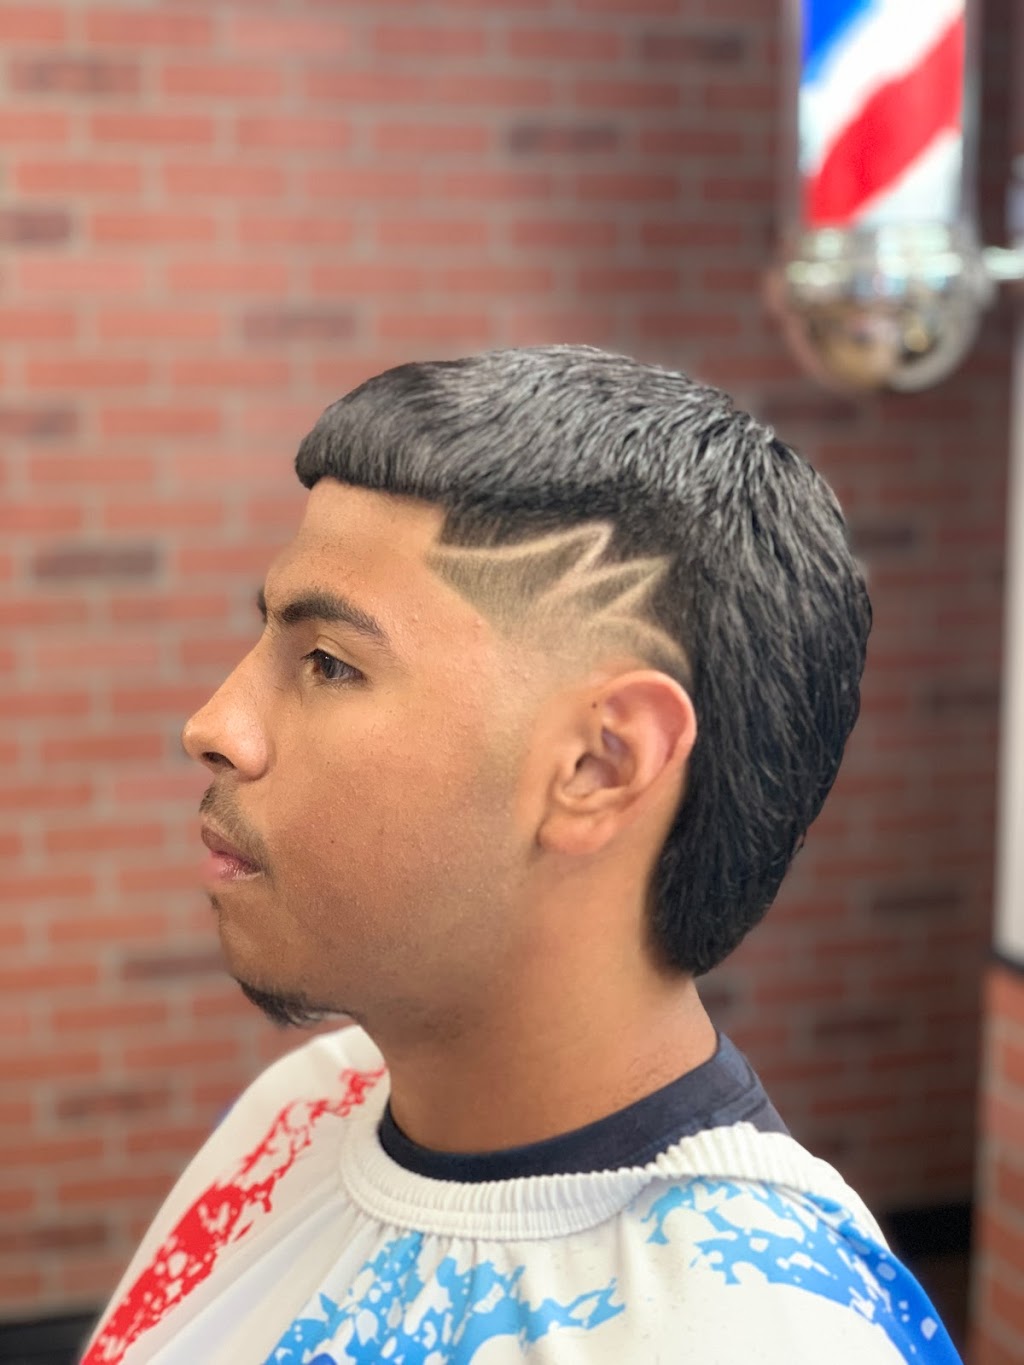 Cut and shave barbershop | 15903 Hwy 6 suite c, Rosharon, TX 77583, USA | Phone: (281) 489-5222